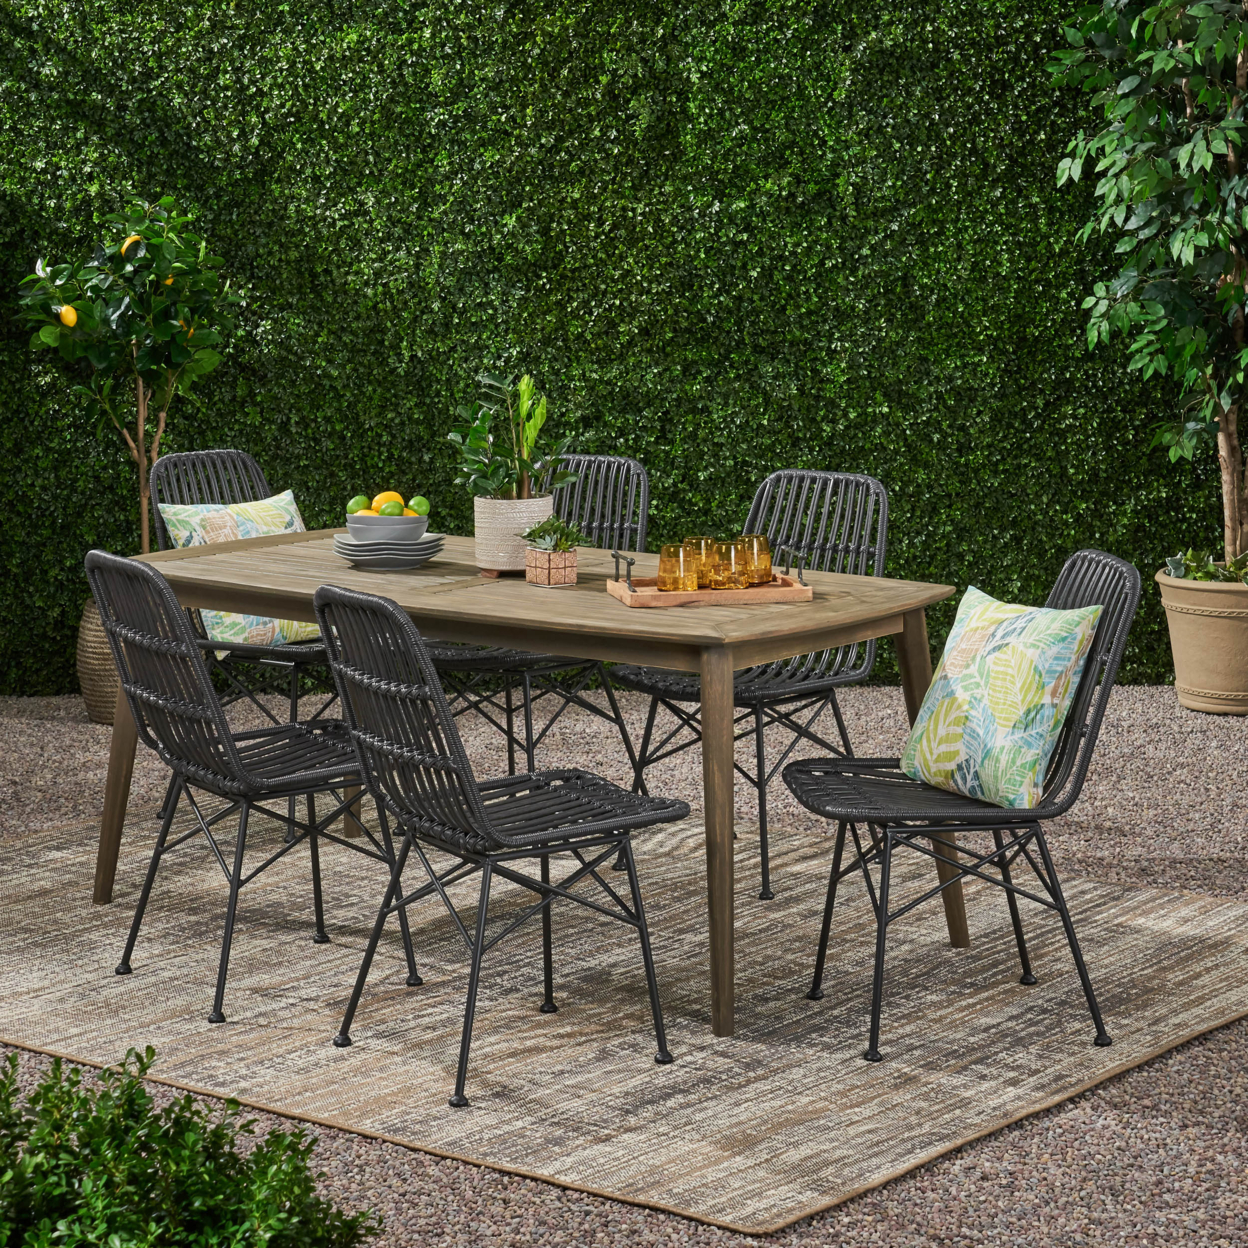 Kendal Outdoor 6 Seater Wicker Dining Set - Gray